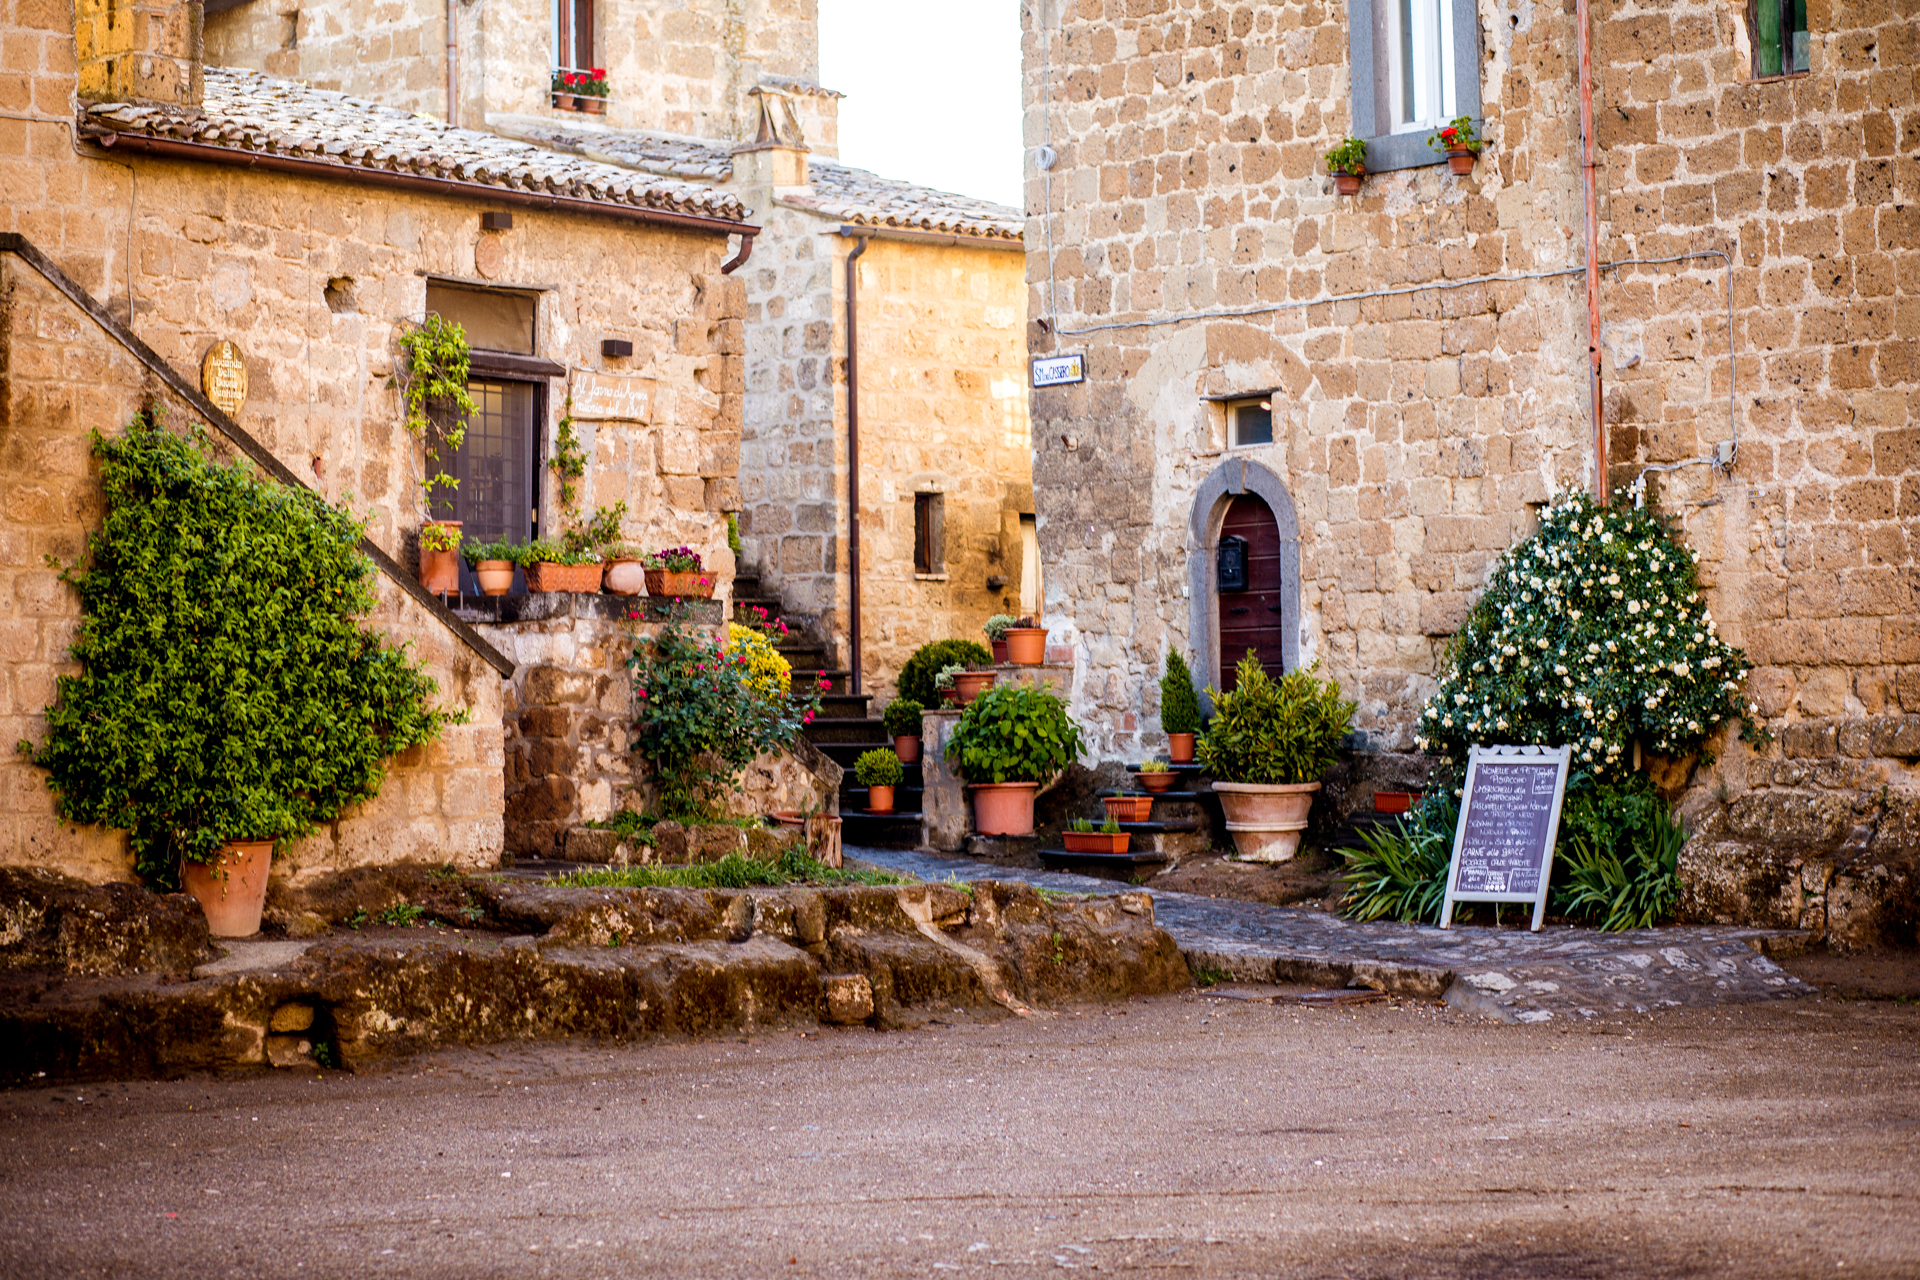 Garden Inspiration: Garden Ideas From Tuscany | Tuscany Garden Ideas by popular New England travel blogger, Shannon Shipman: image of terracotta pots on walls and stone steps. 